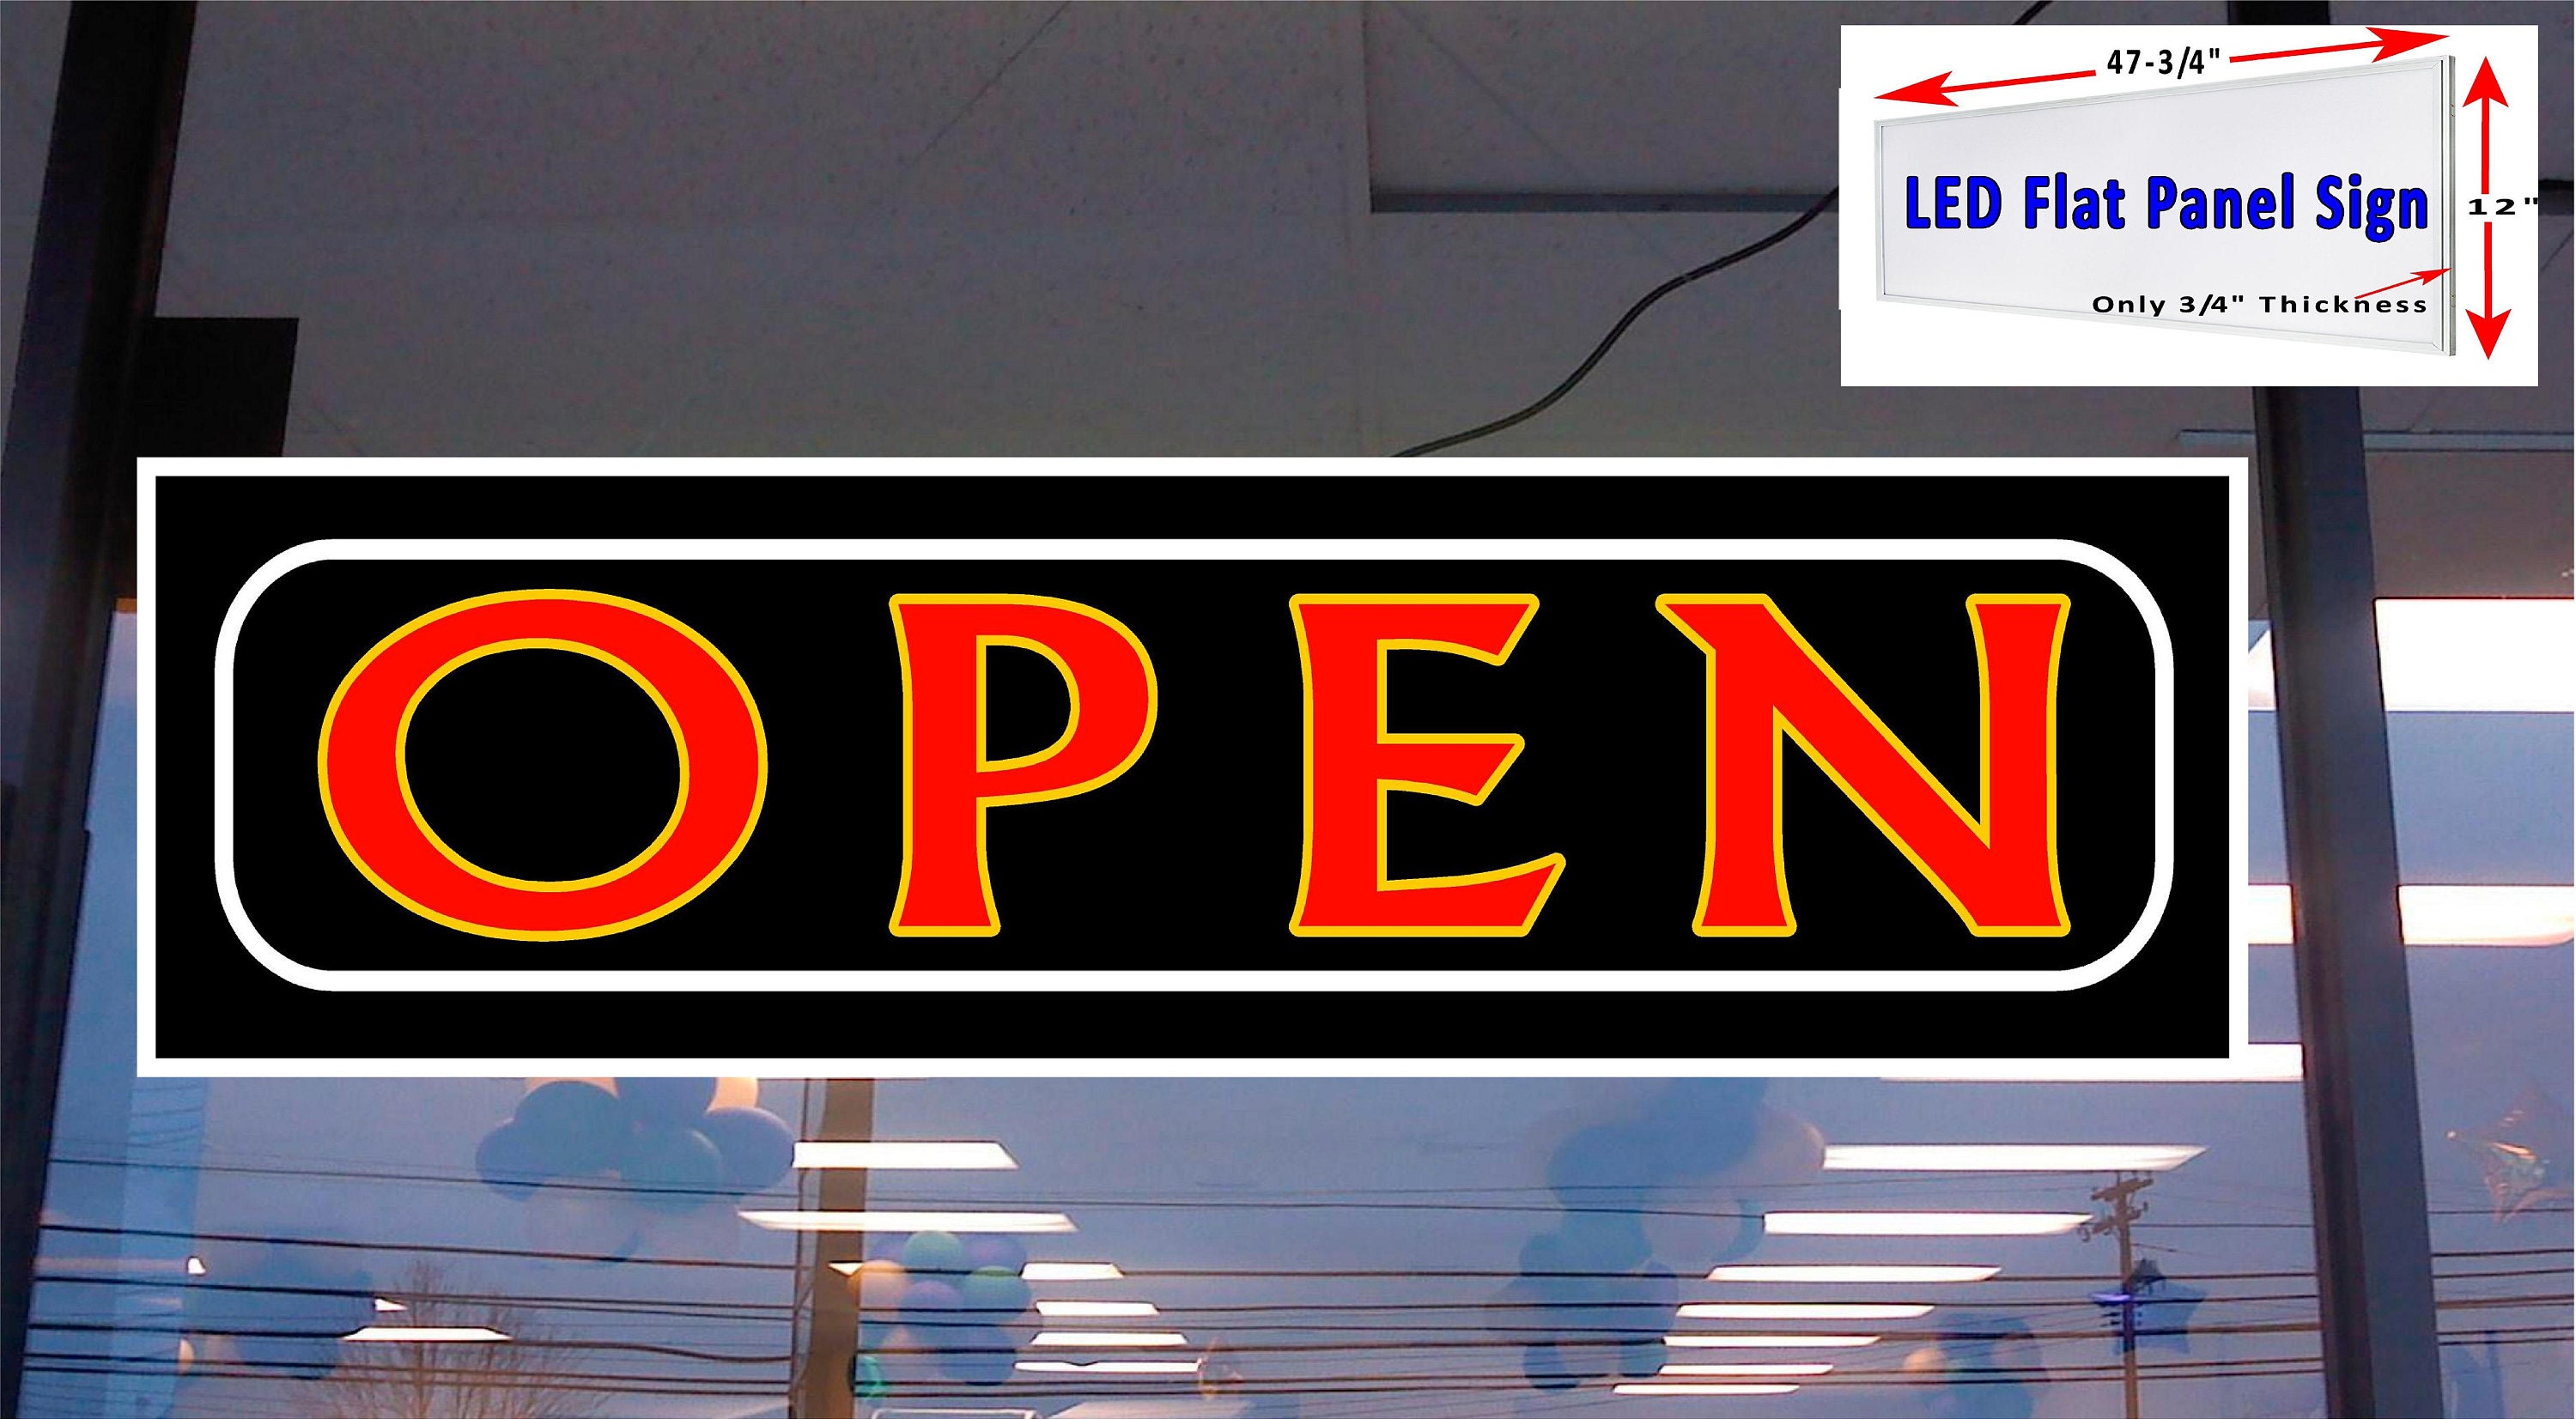 LED flat panel Light Box Sign CONSIGNMENT STORE 48x12 Window Sign